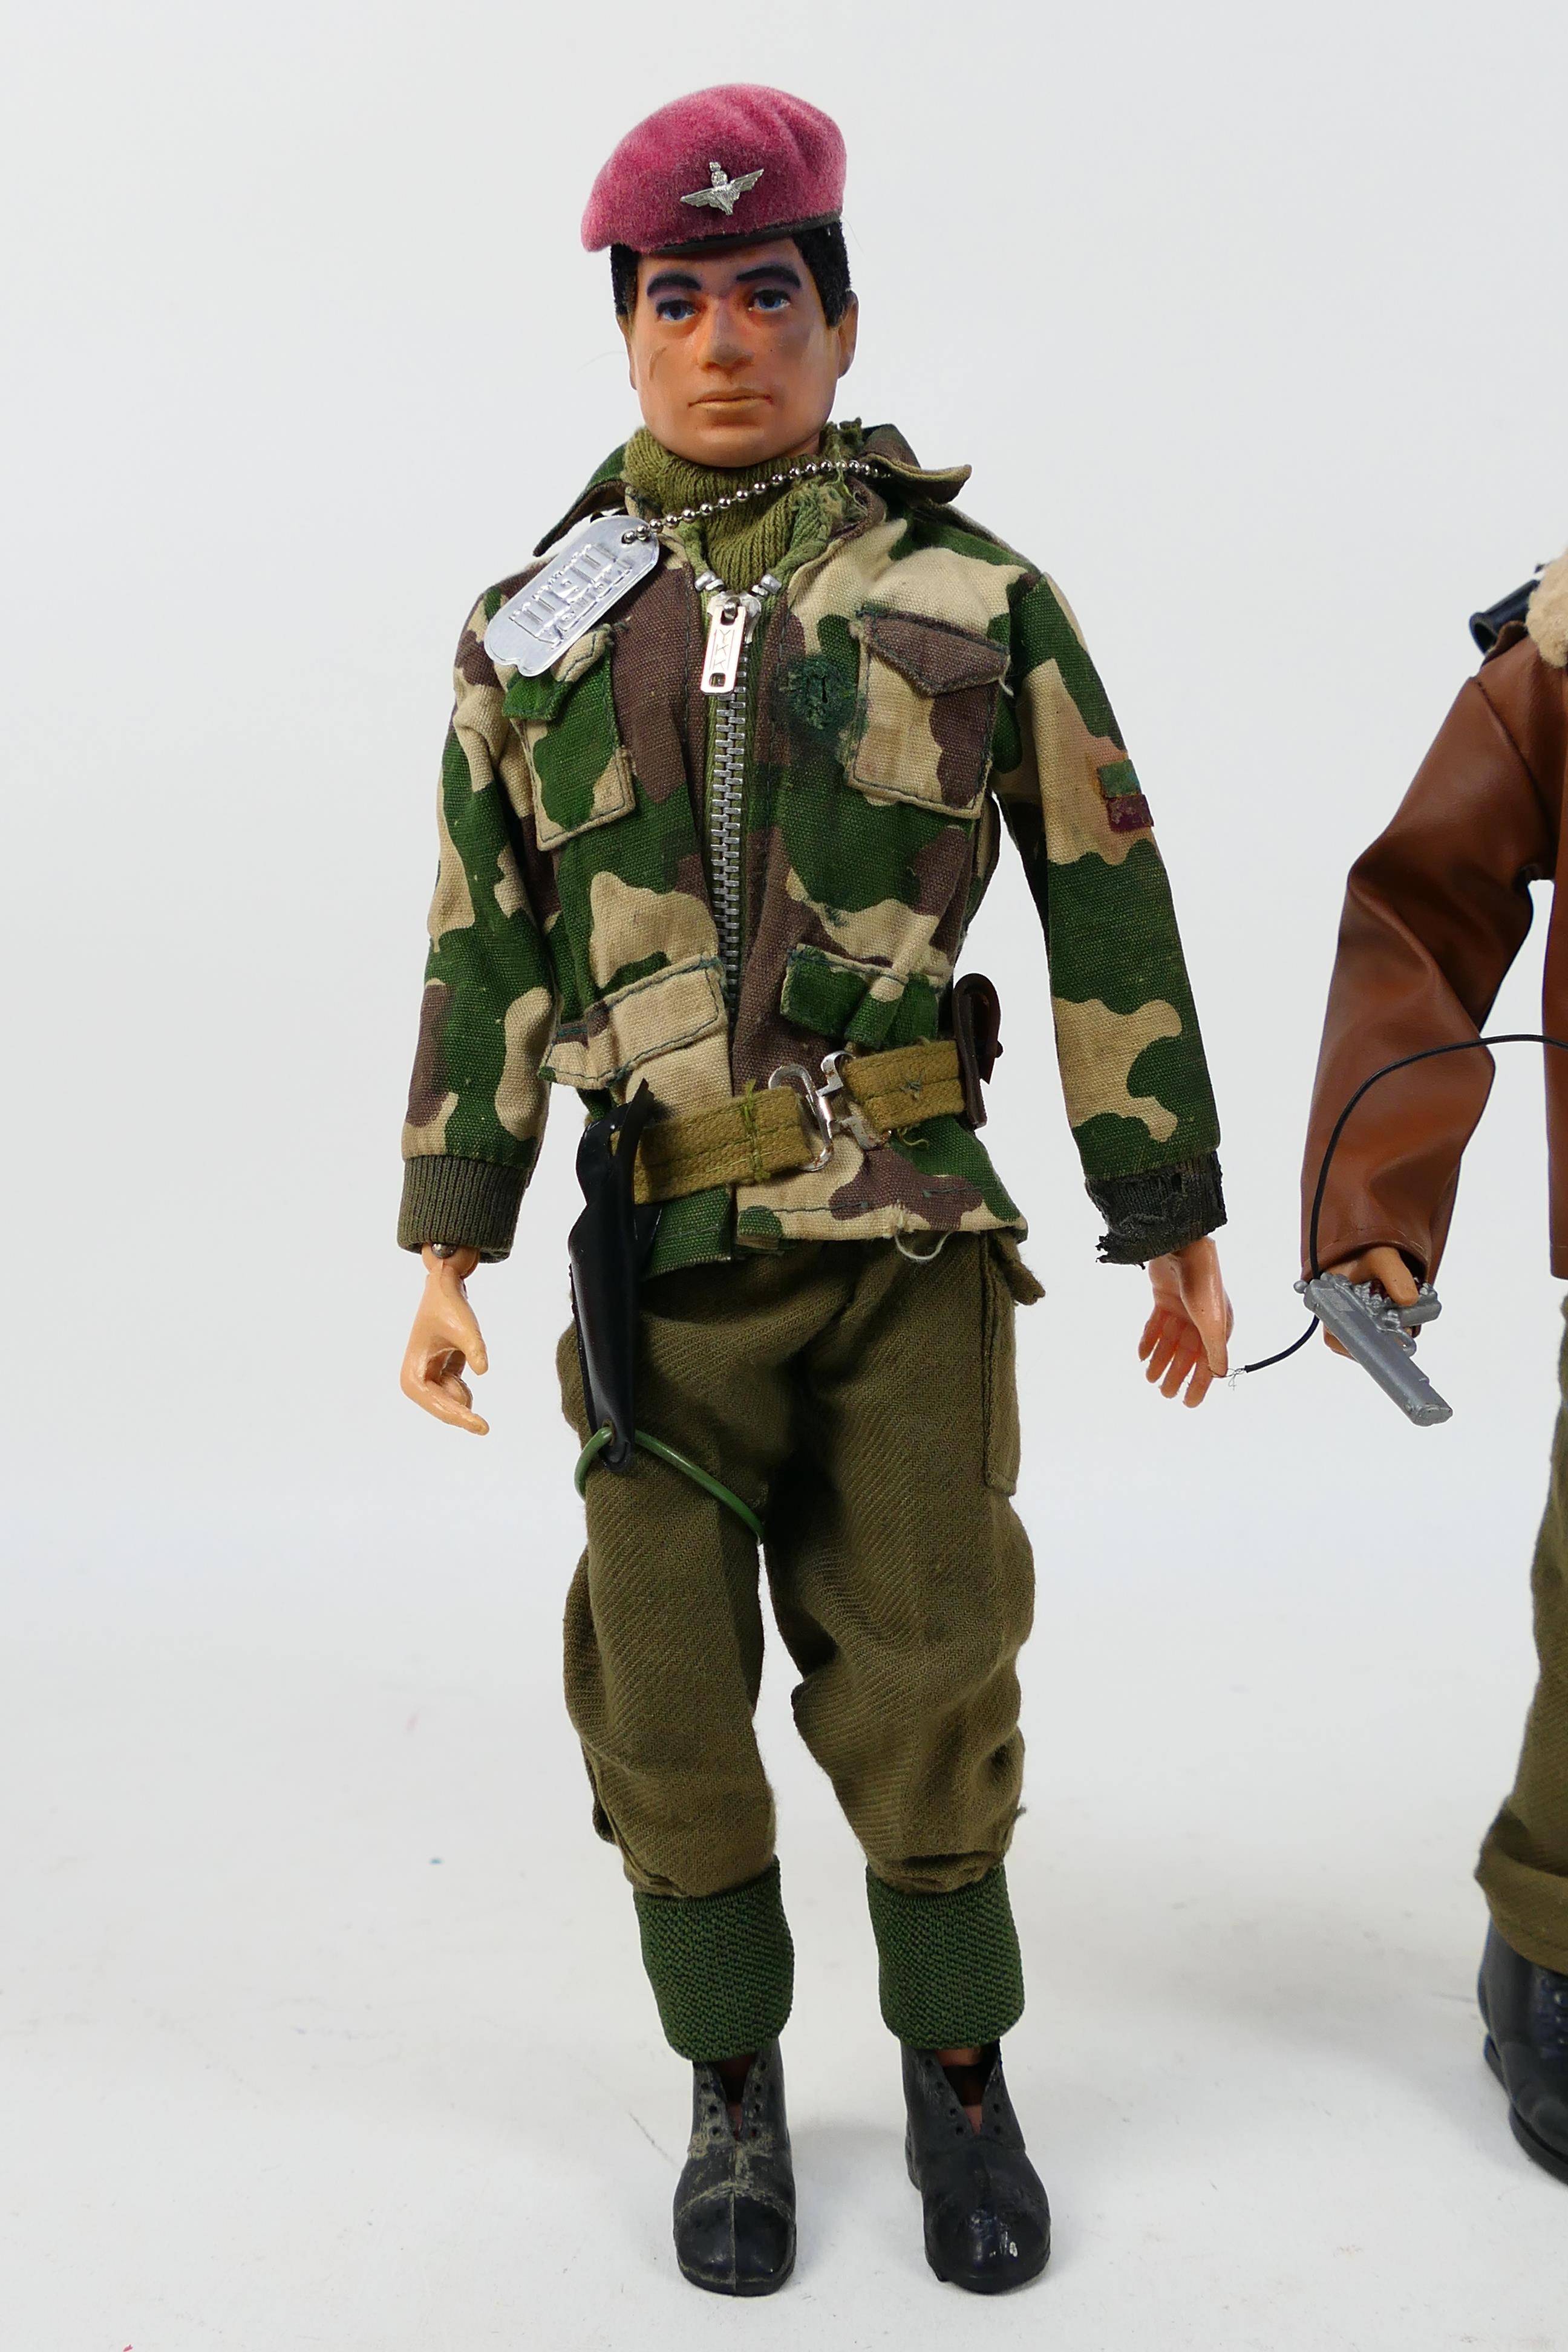 Palitoy - Action Man - Two unboxed vintage Action Man figures in Tank Commander and Parachute - Image 2 of 8